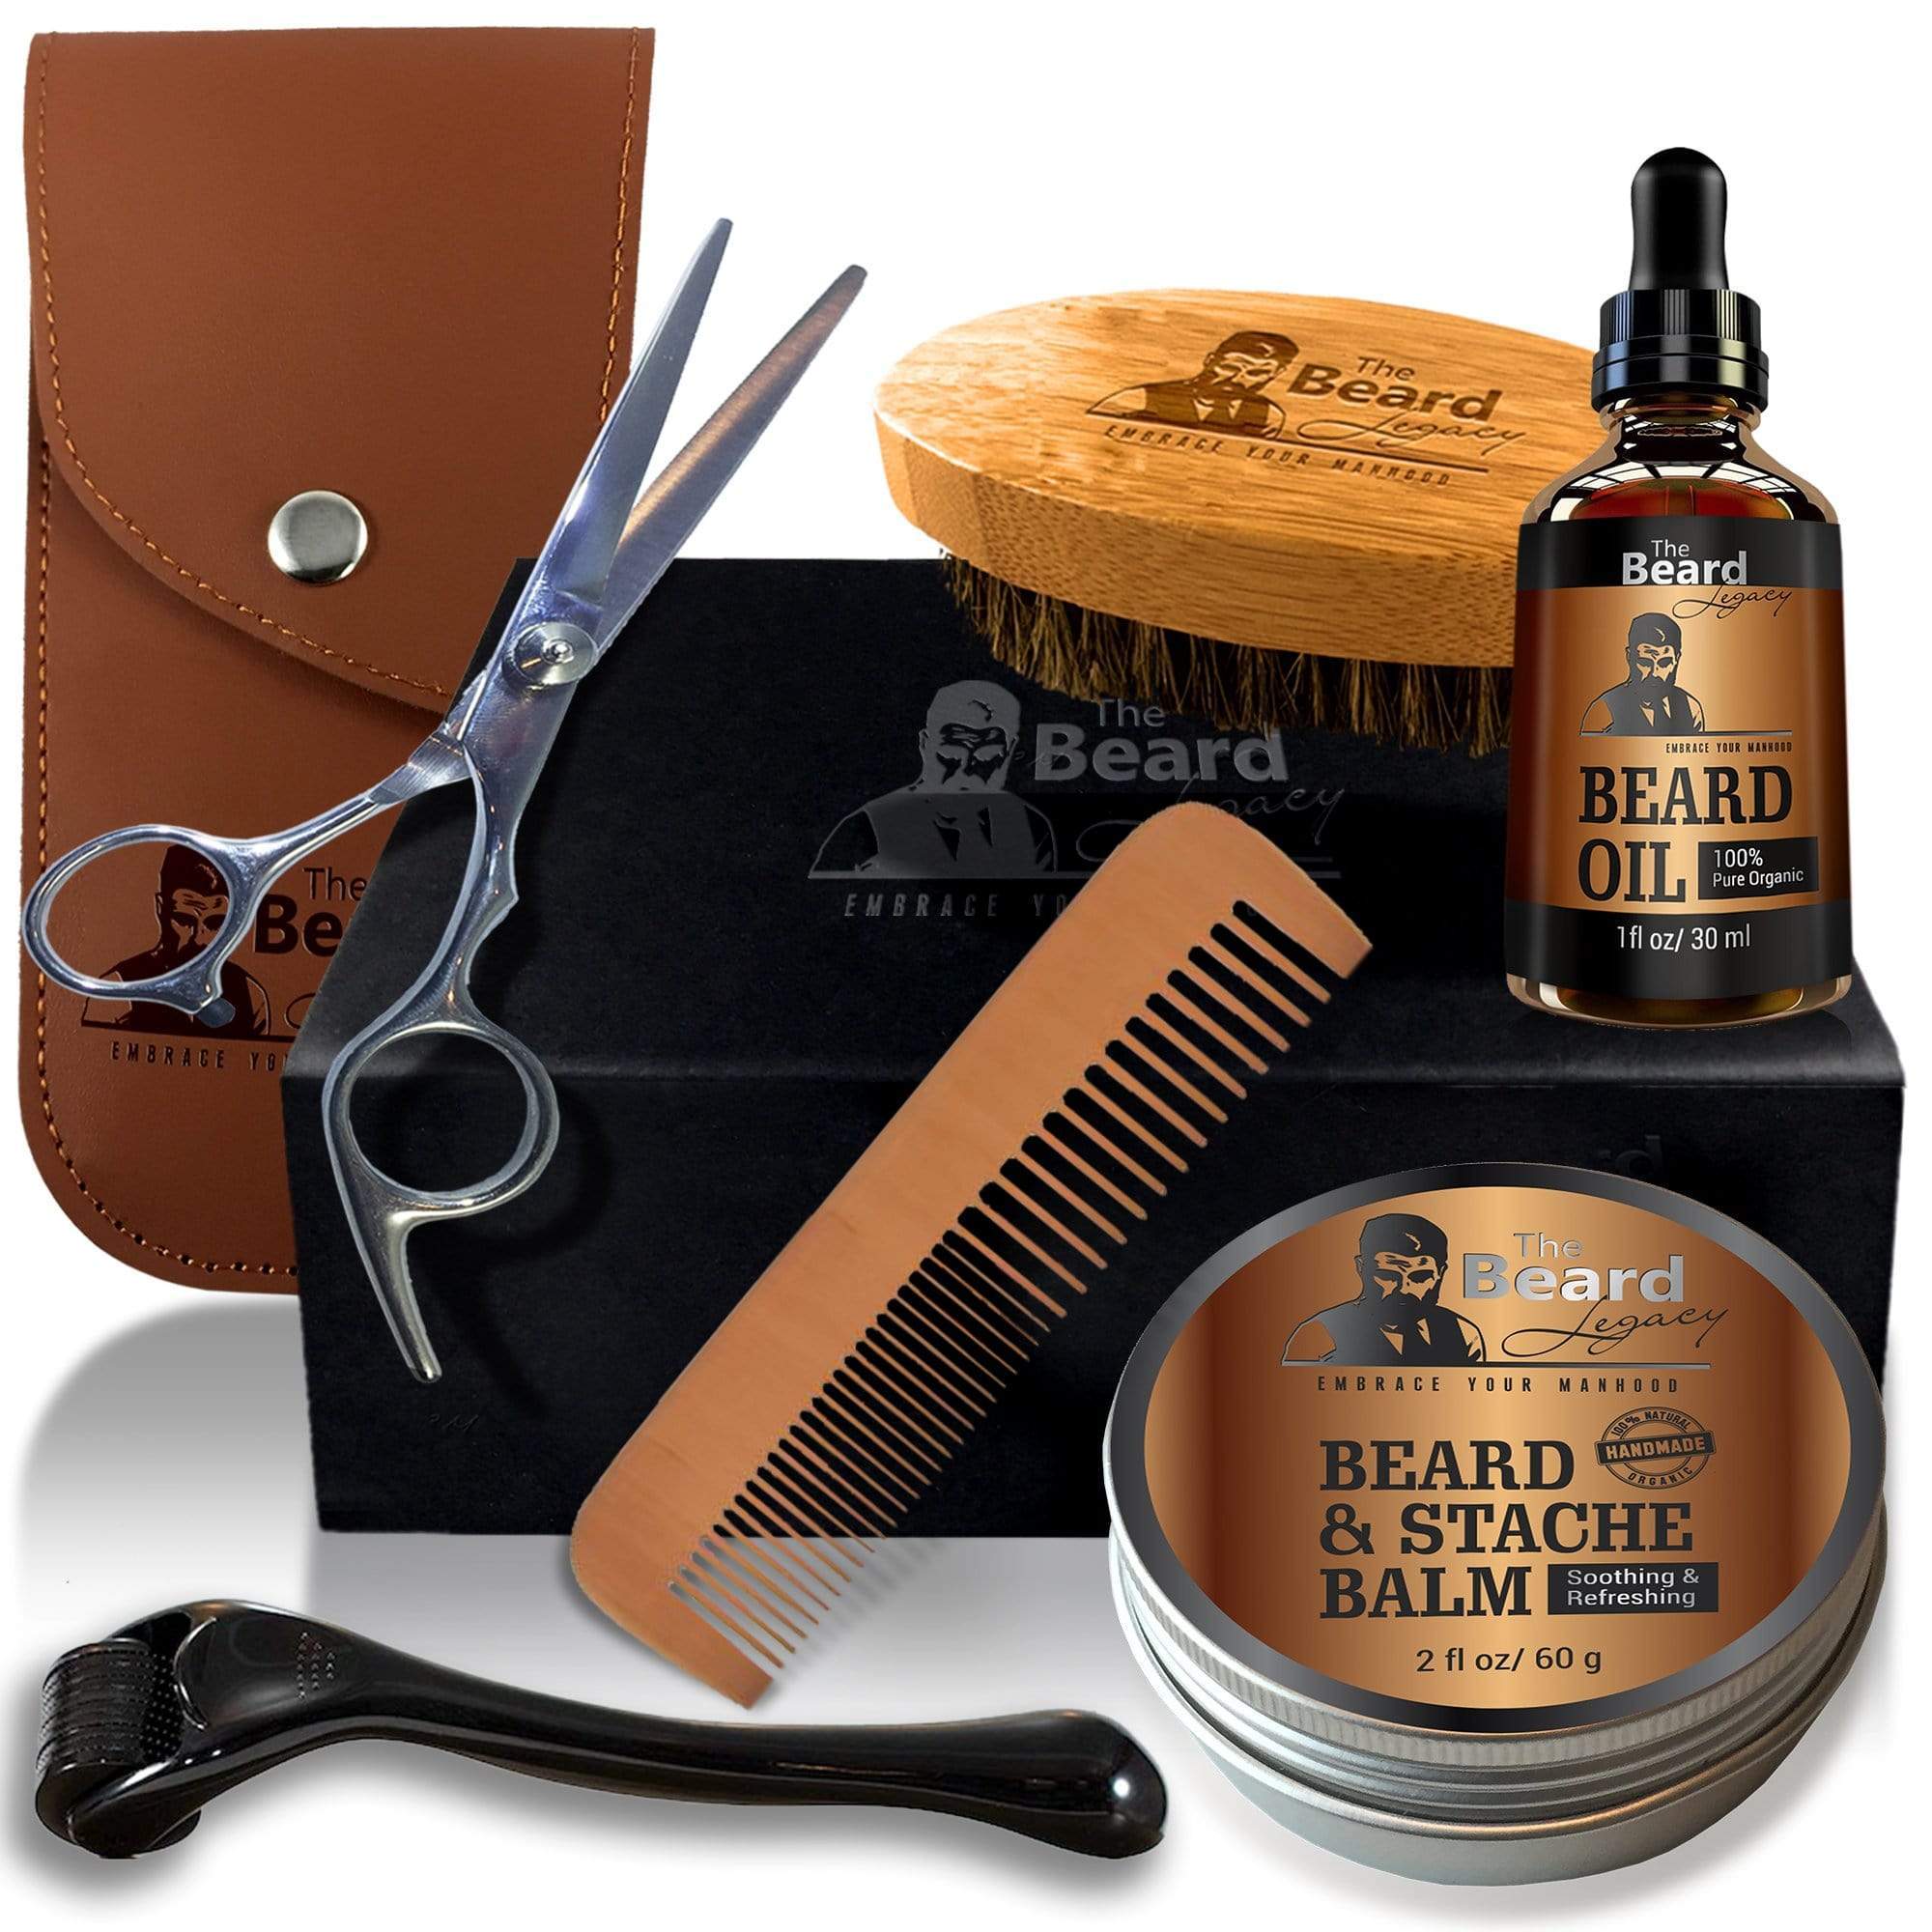 The Beard Legacy A Complete Beard Grooming Kit For Men 9493